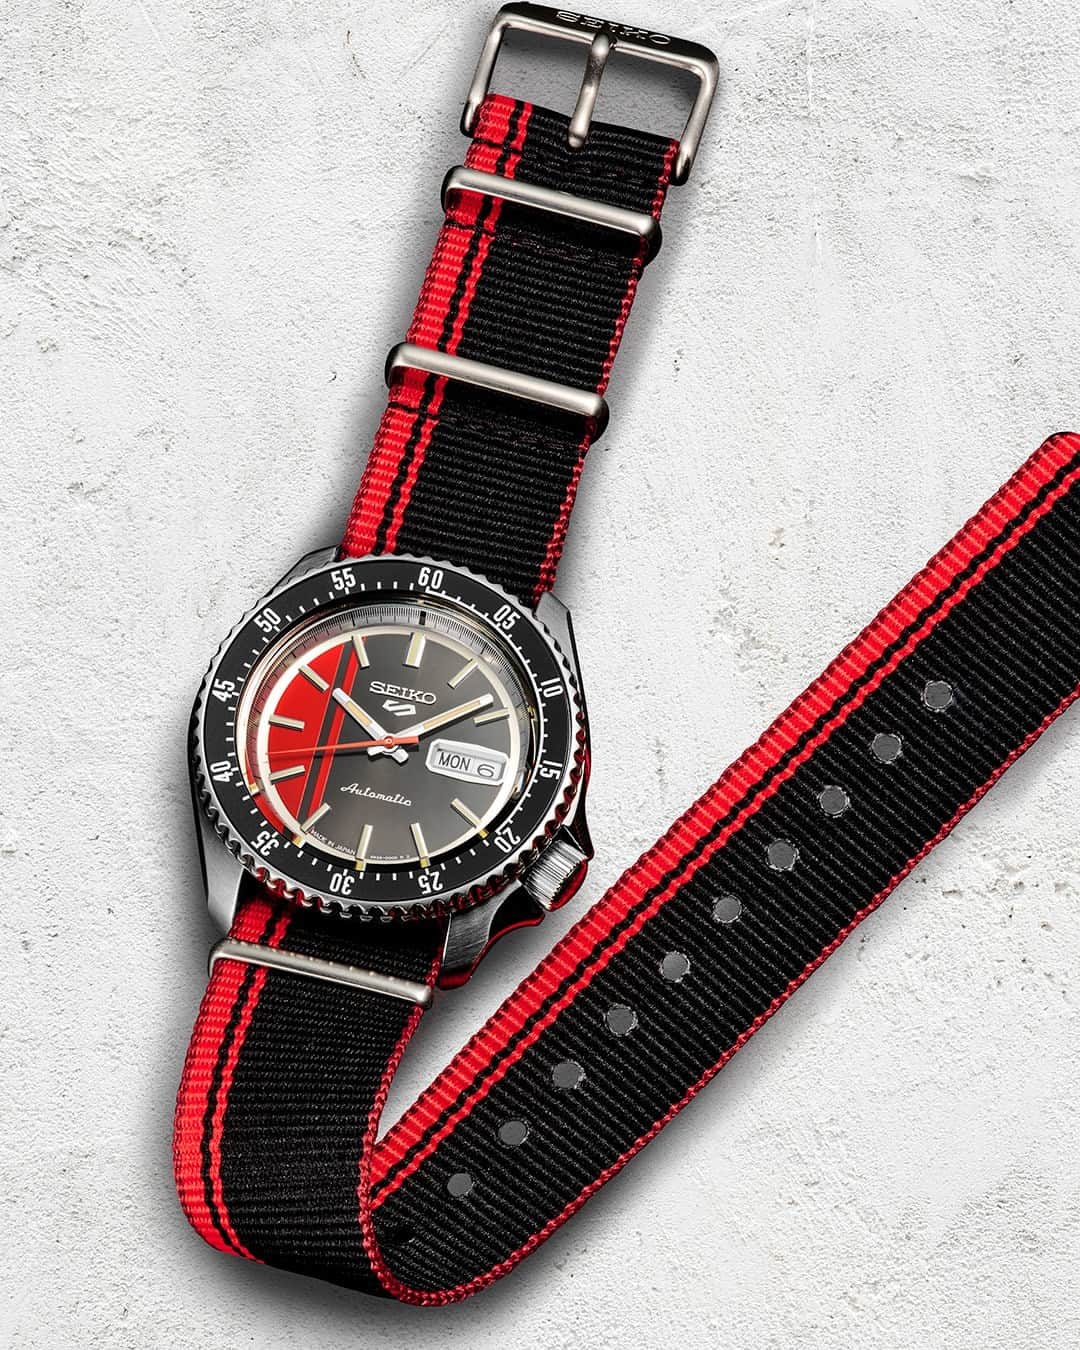 Seiko Watchesのインスタグラム：「Start... 🏁 - #ShowYourStyle this holiday season with this new bold accessory. #SRPK71 steals the show with its bright red and black colors inspired by vintage racing cars. Get in gear and get yours now!  #Seiko #Seiko5Sports」